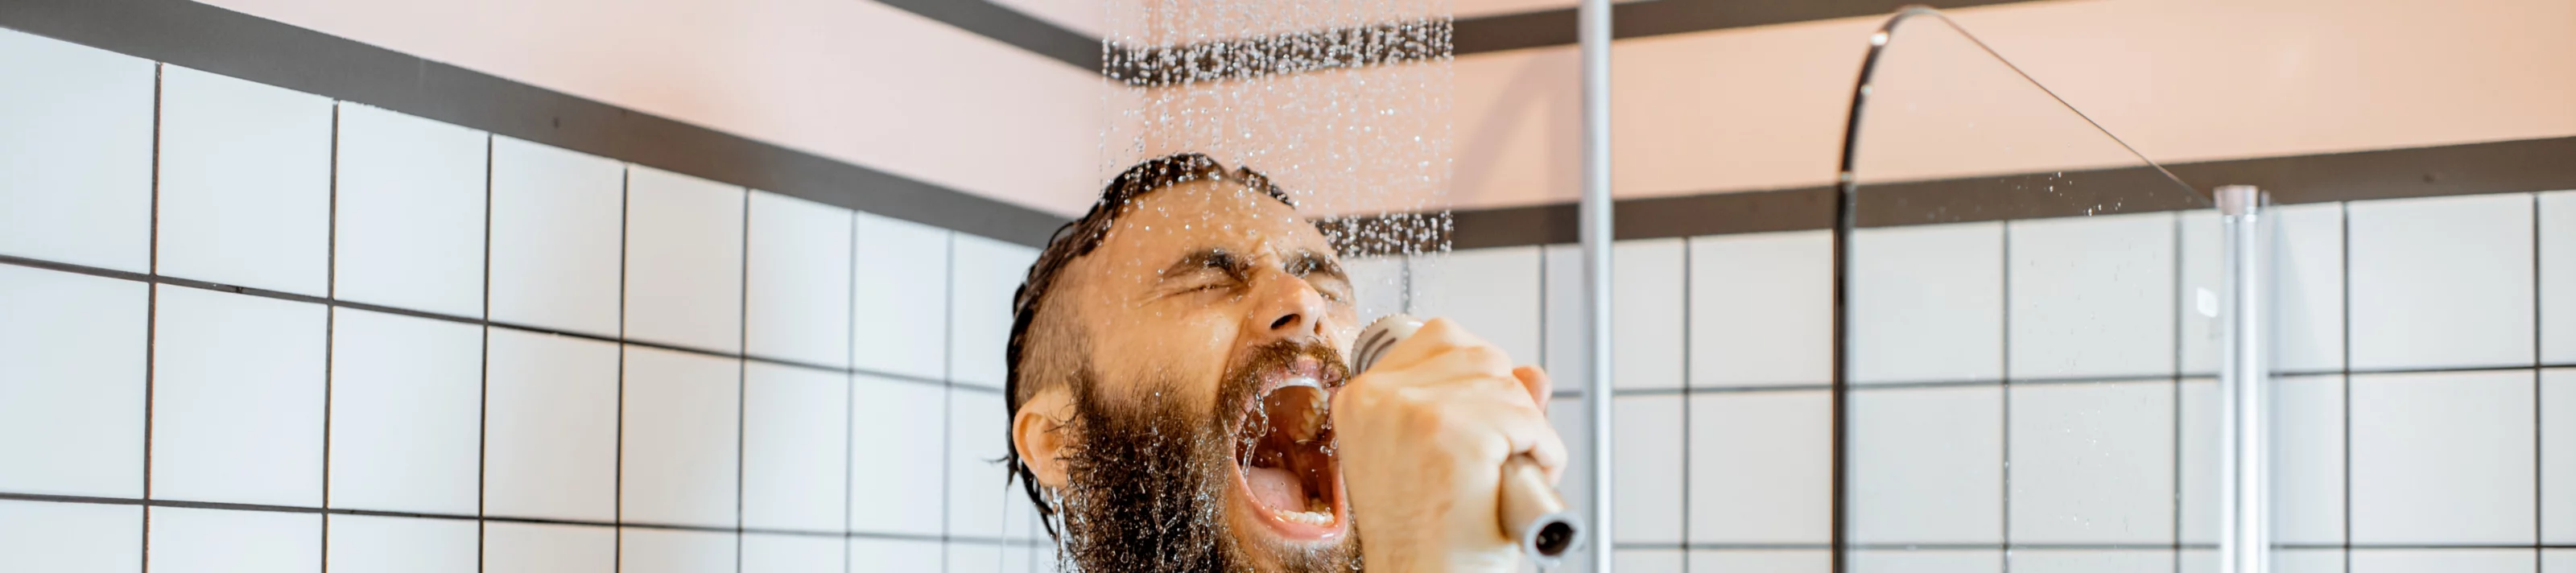 Man singing in the shower